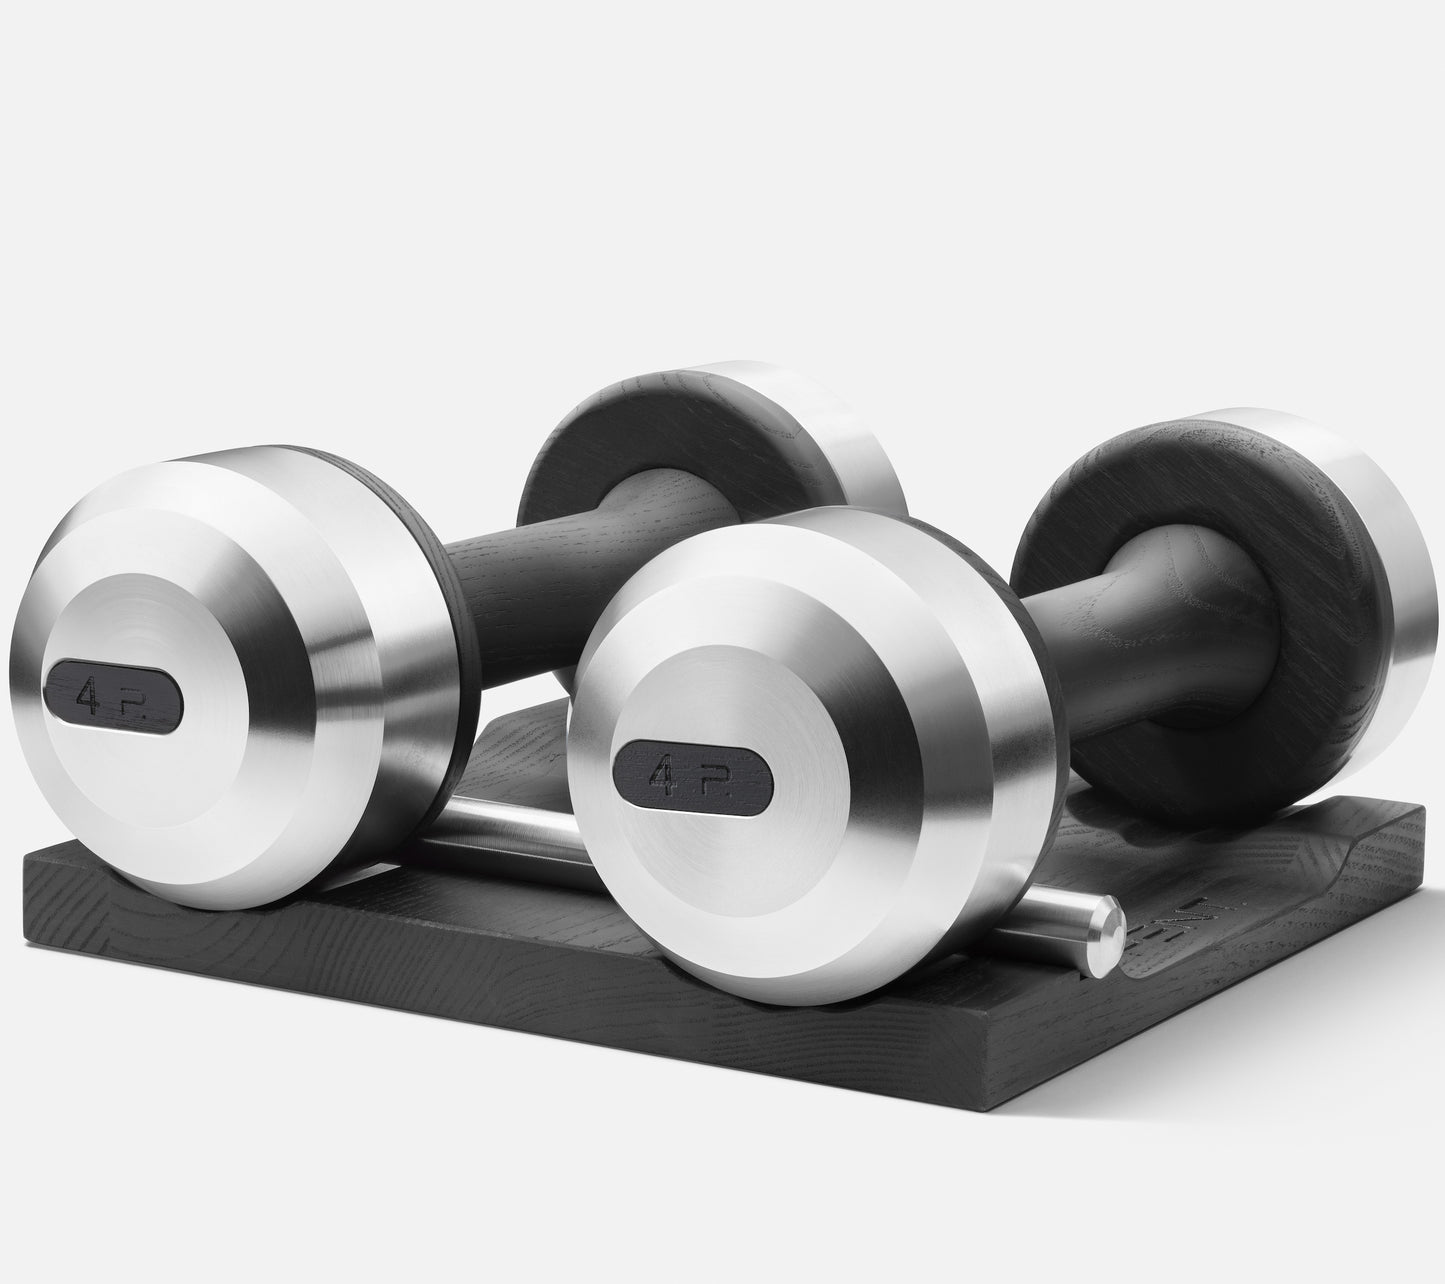 PENT Luxury Customisable Dumbbells with a solid wooden stand, made of natural material. Available in weights ranging between 2 - 30kg.